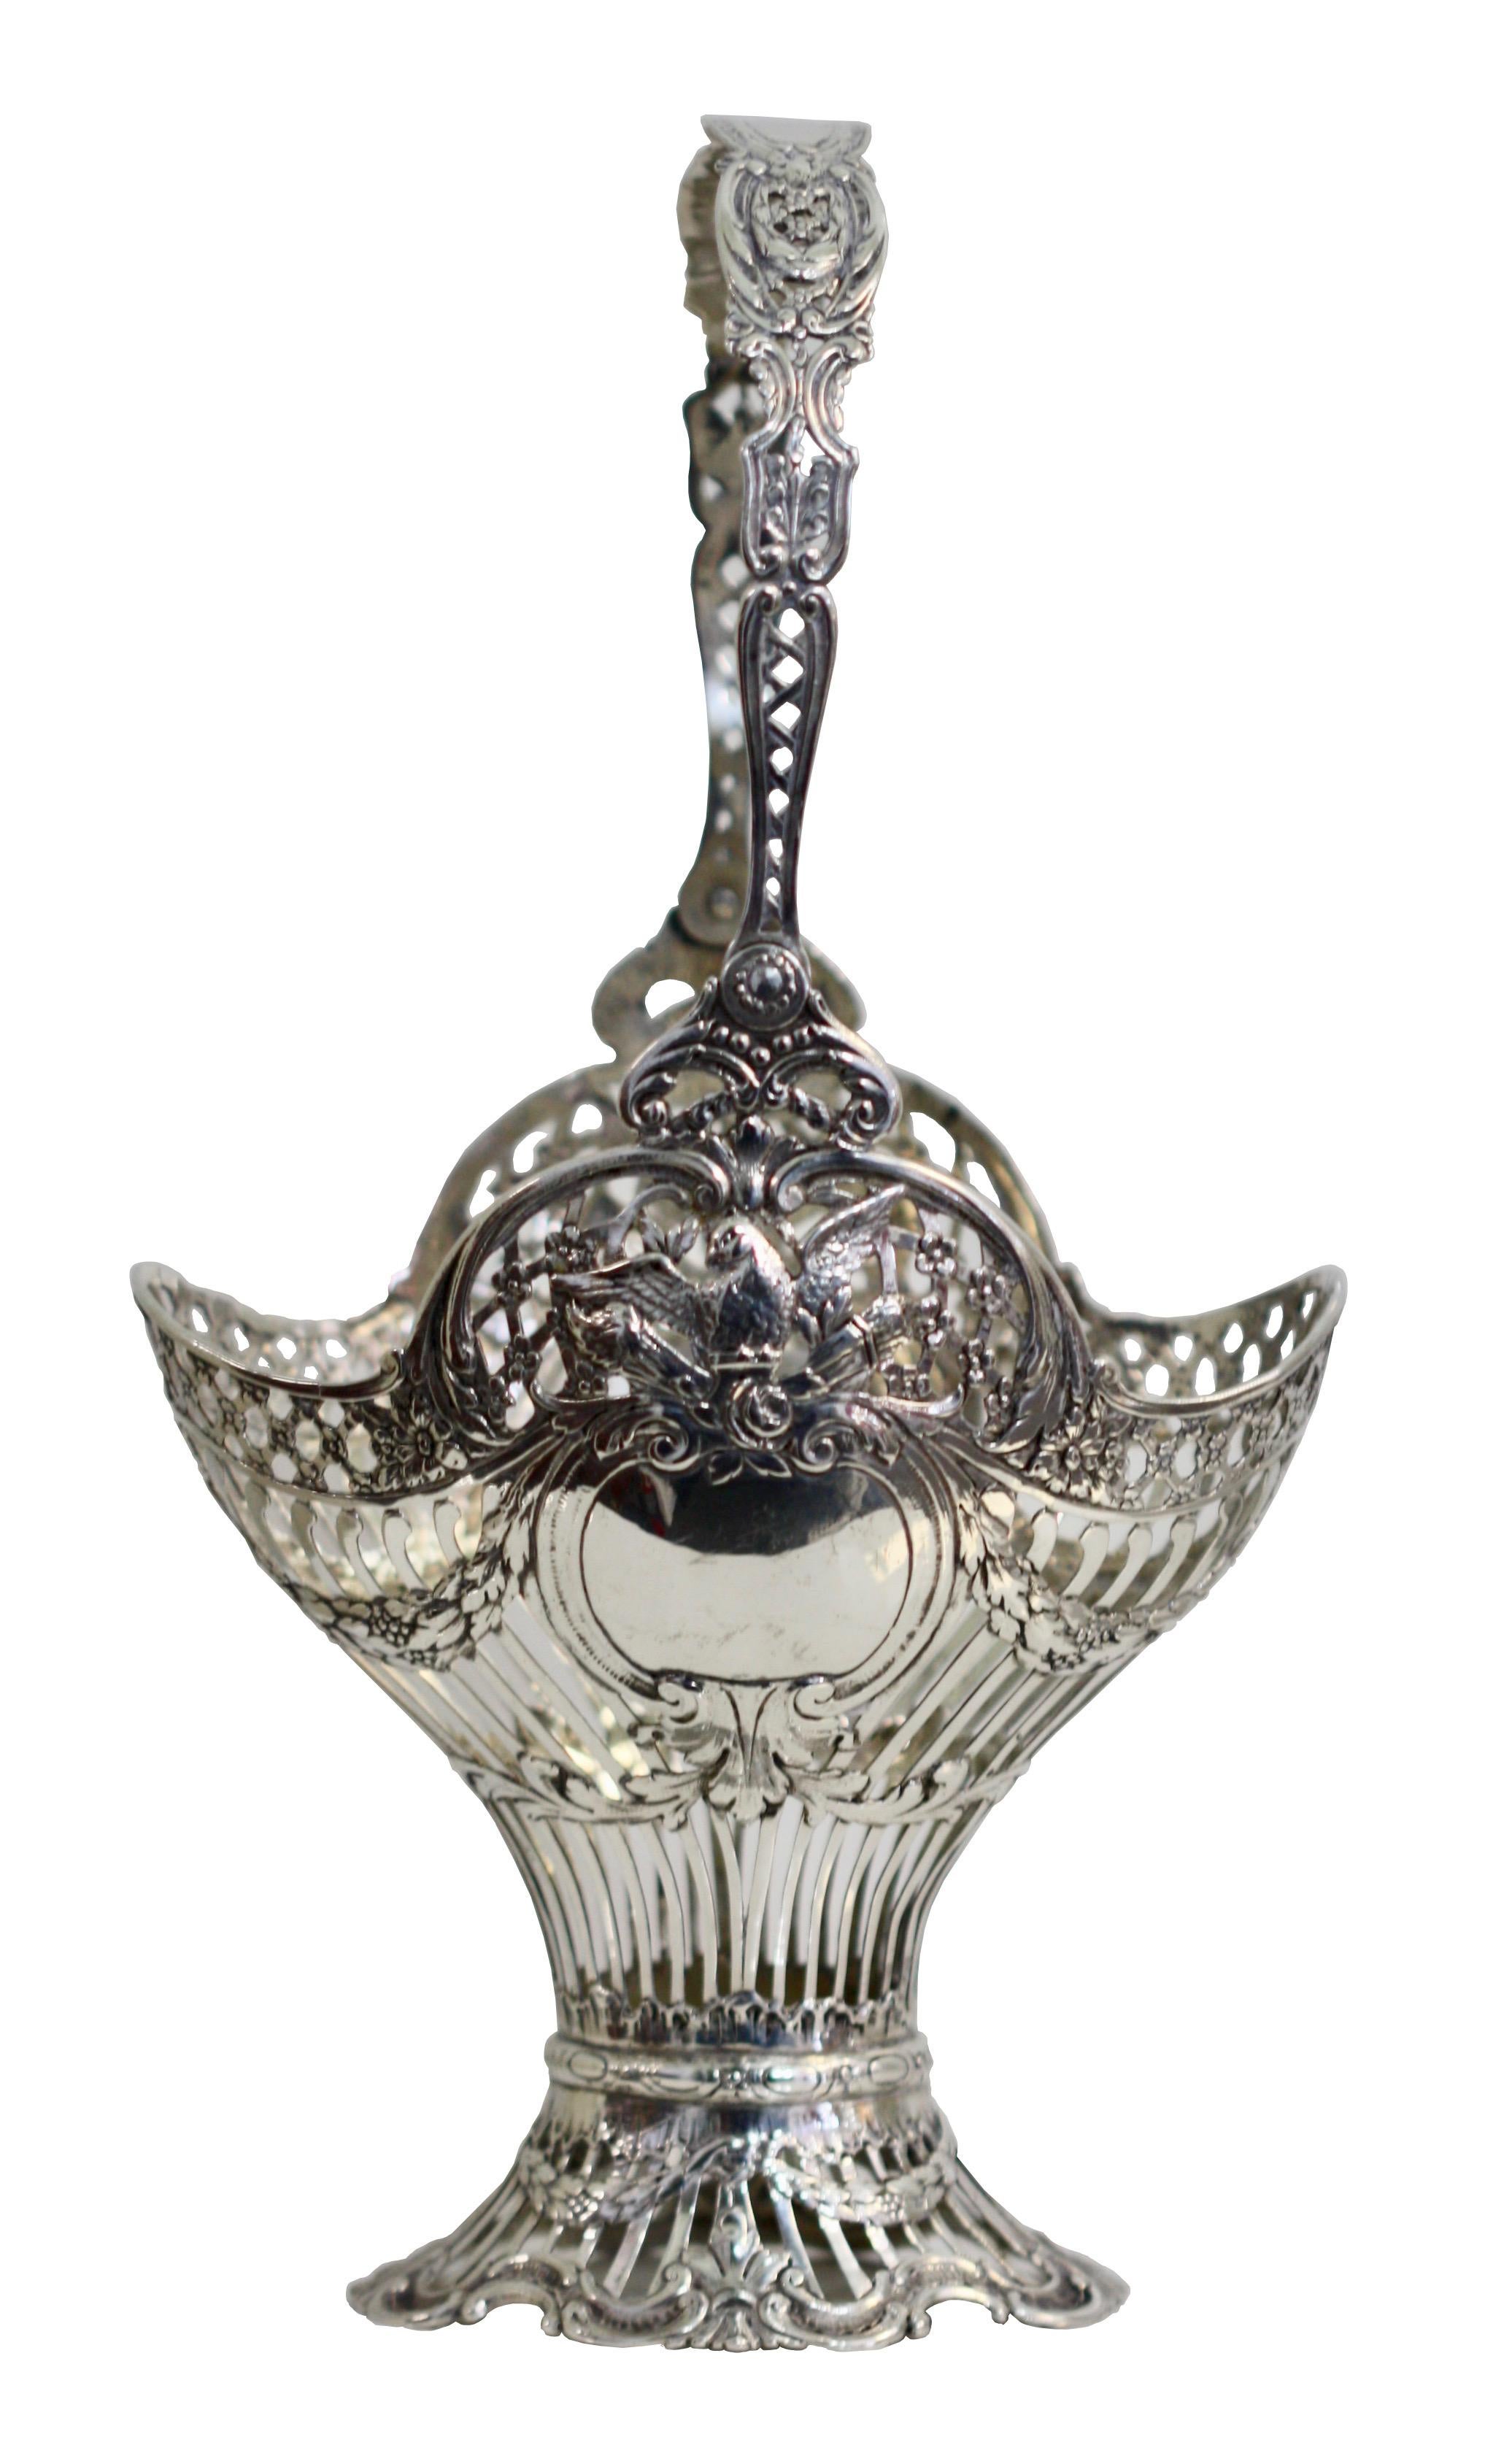 Fine Continental silver pierced foliate design basket each side with a dove above a vacant shield, applied with a swing handle
Measures: Width 5.5 in. (14 cm.)
Depth 3.93 in. (10 cm.)
Height 10.23 in. (26 cm.)
Weighing approximately 199 grams, 6